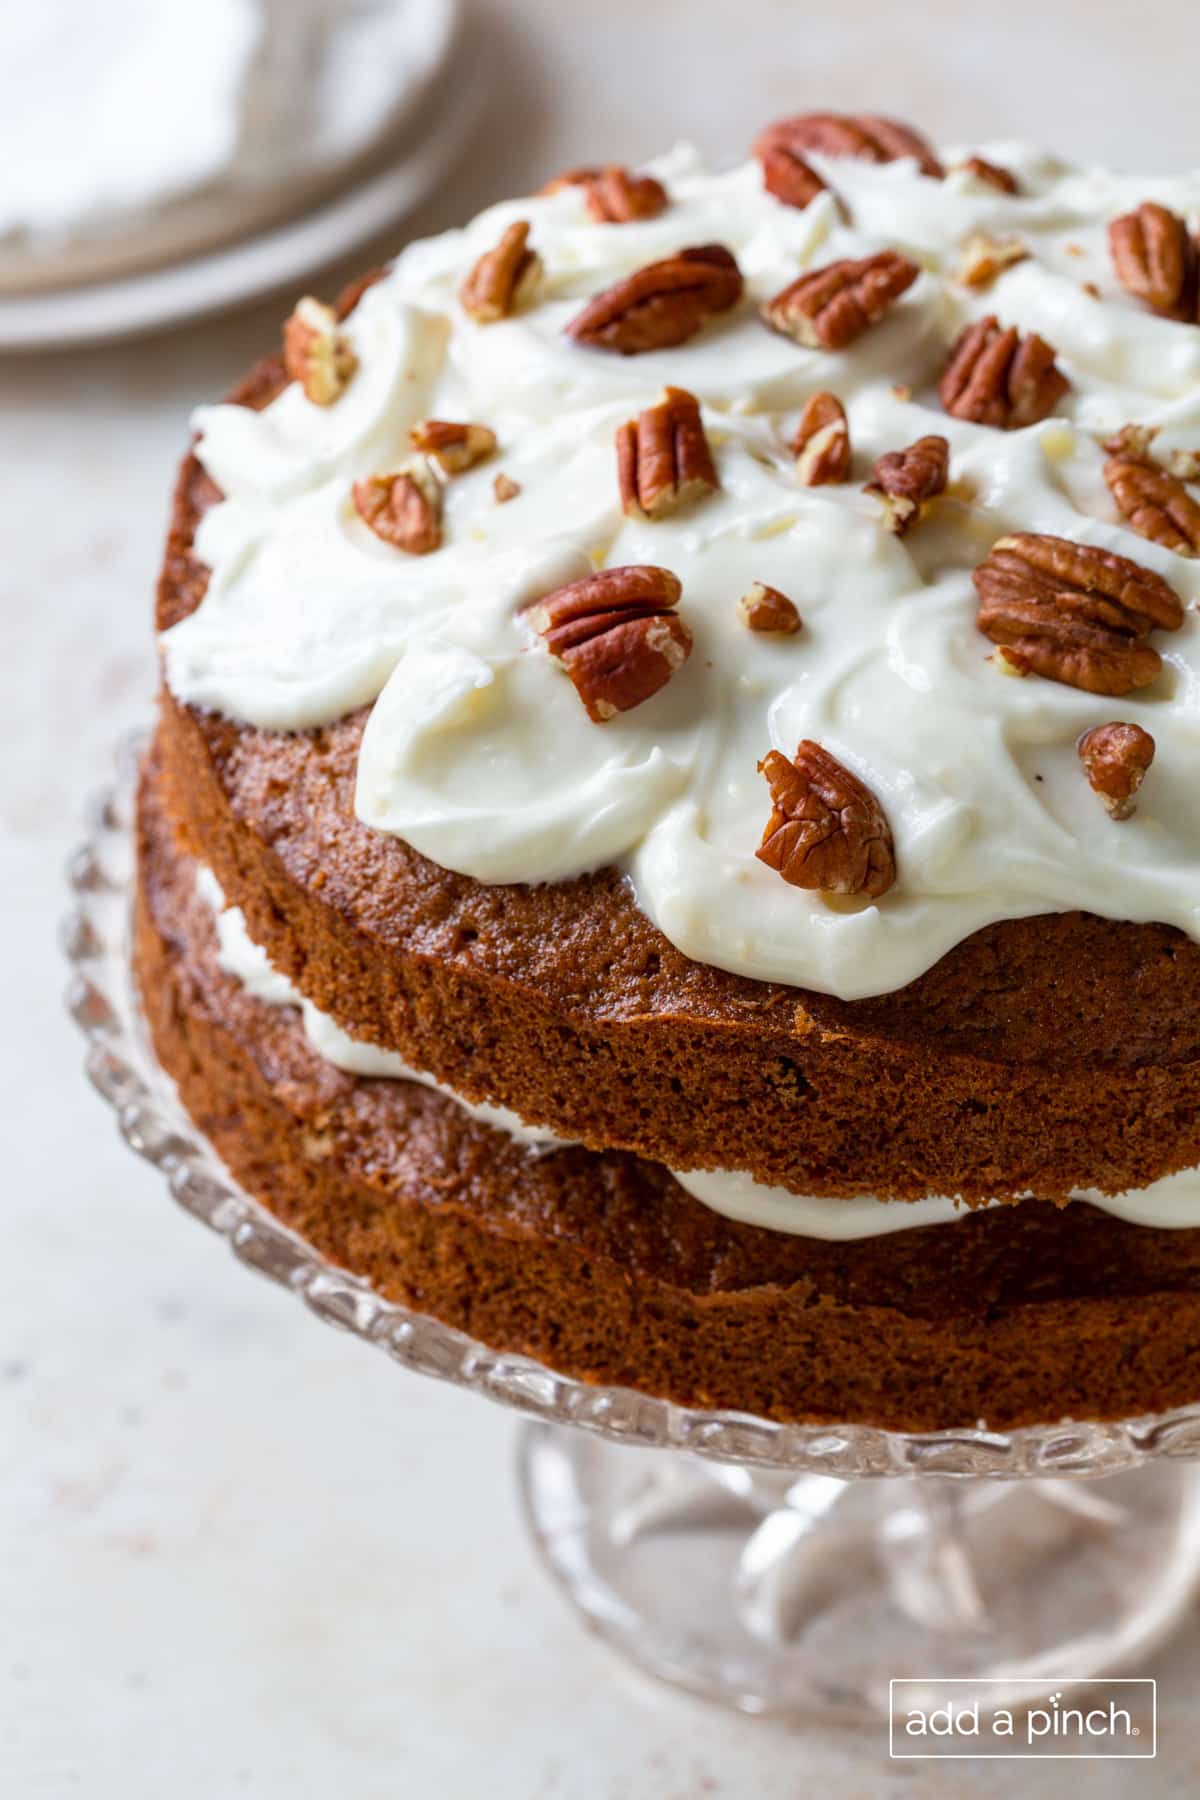 Photo of carrot cake with cream cheese frosting and pecans.